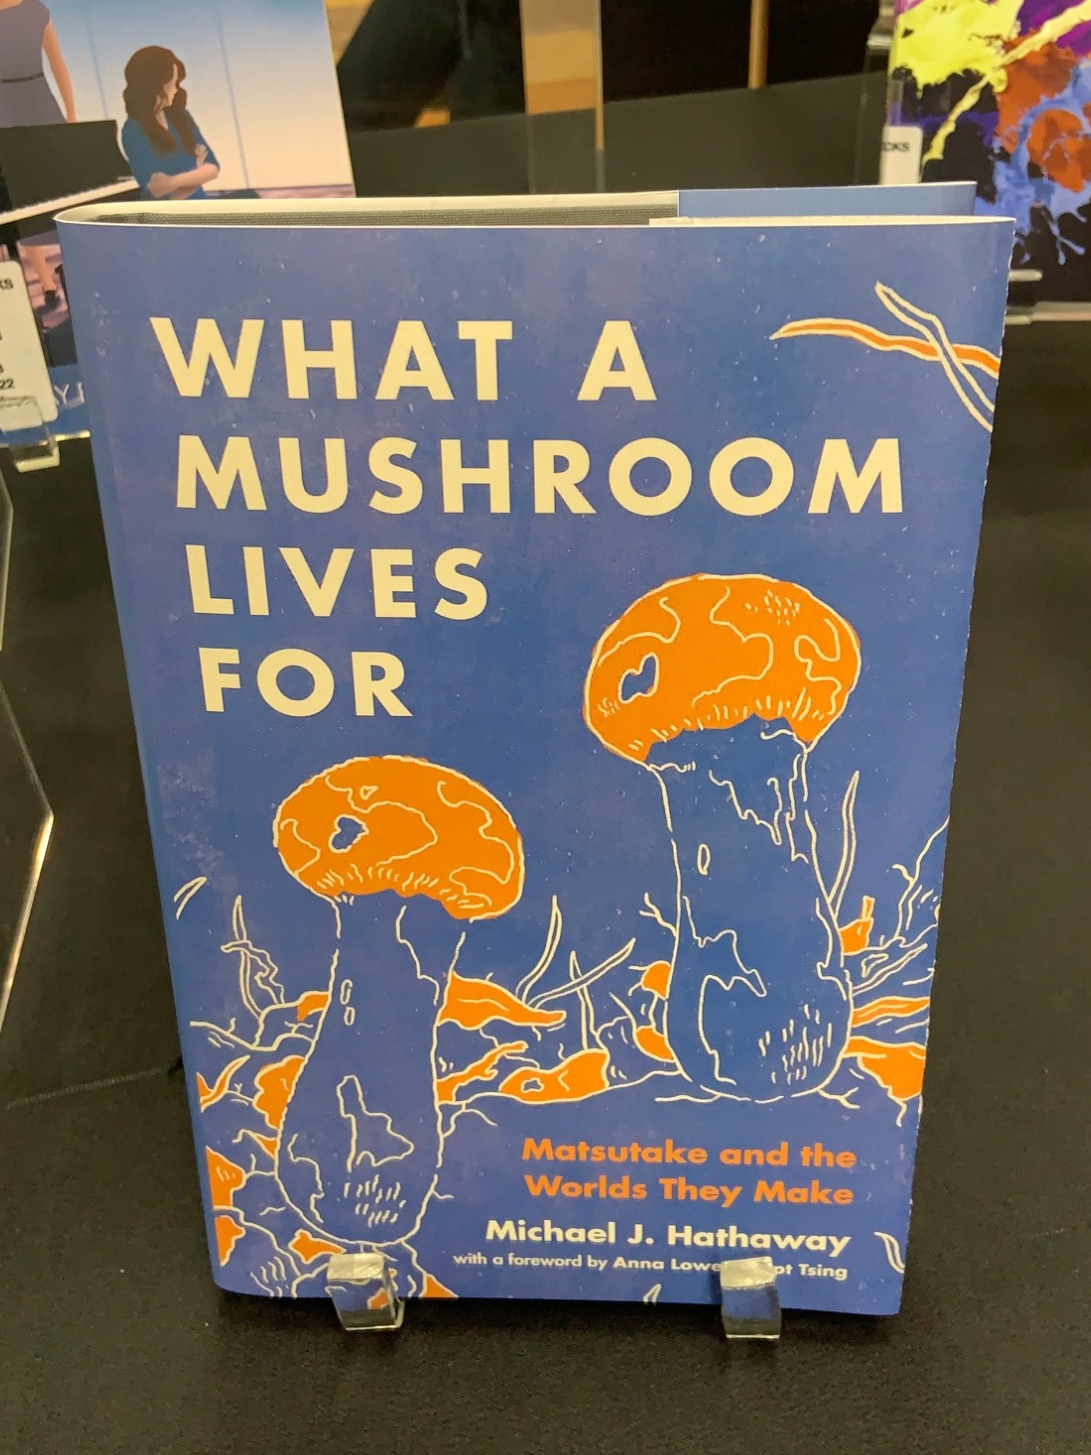 What a Mushroom Lives For by Michael J. Hathaway